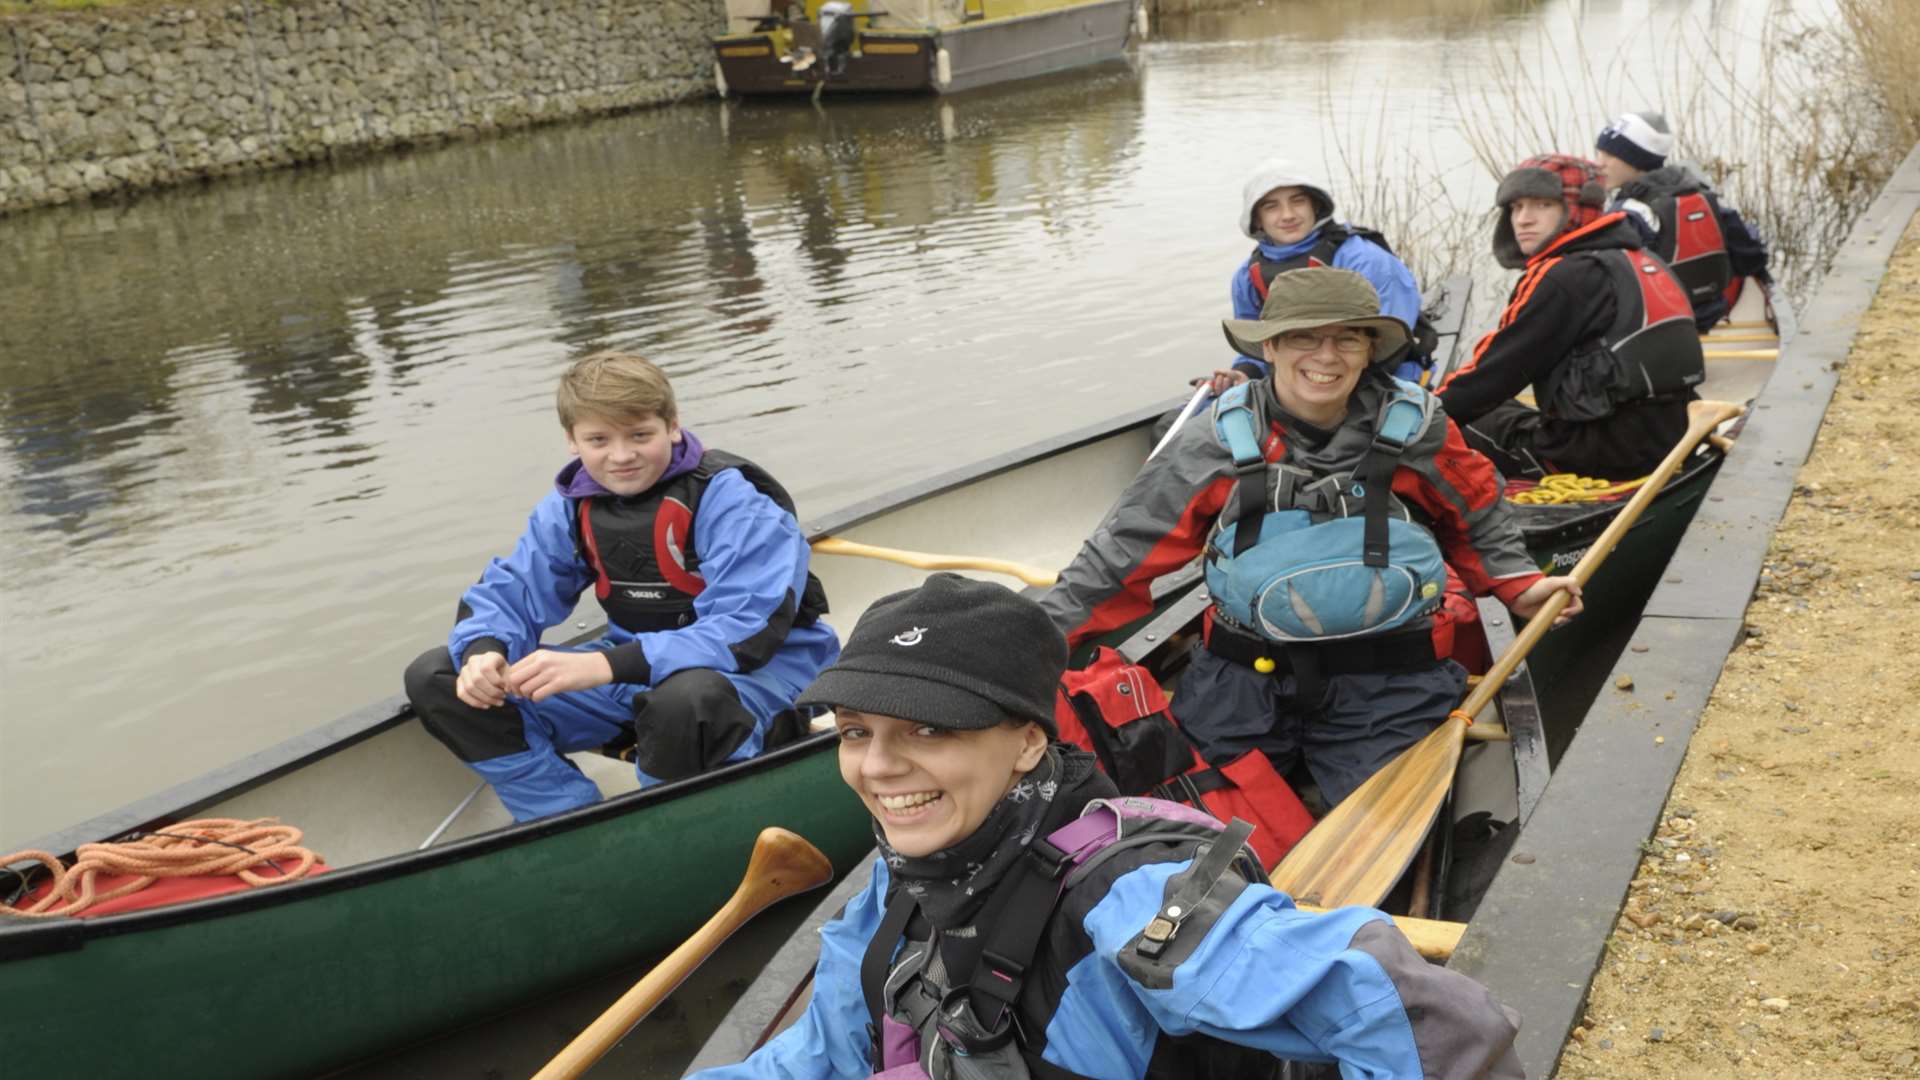 Gravesend Sea Cadets came along to row in canoes along the canal